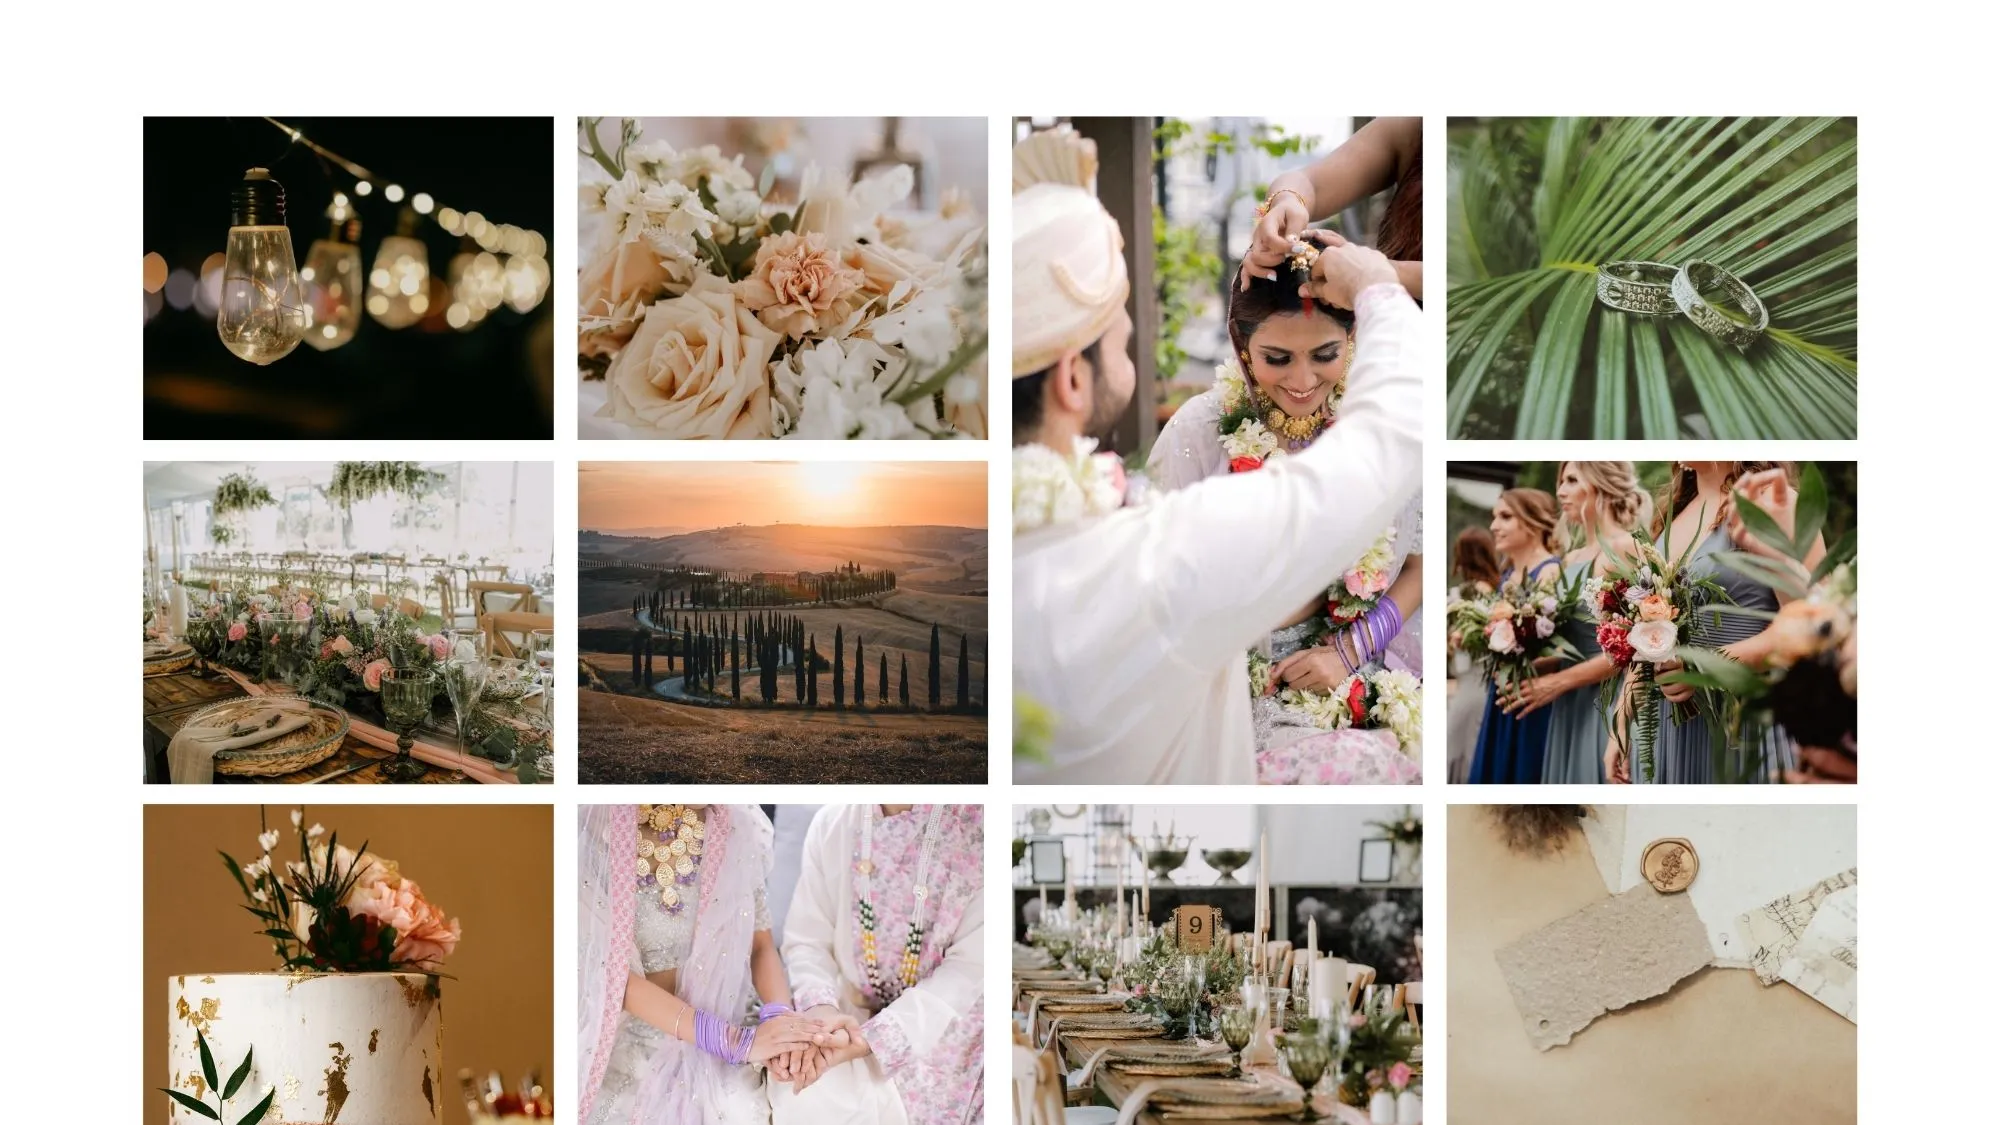 Once you have got your wedding mood board